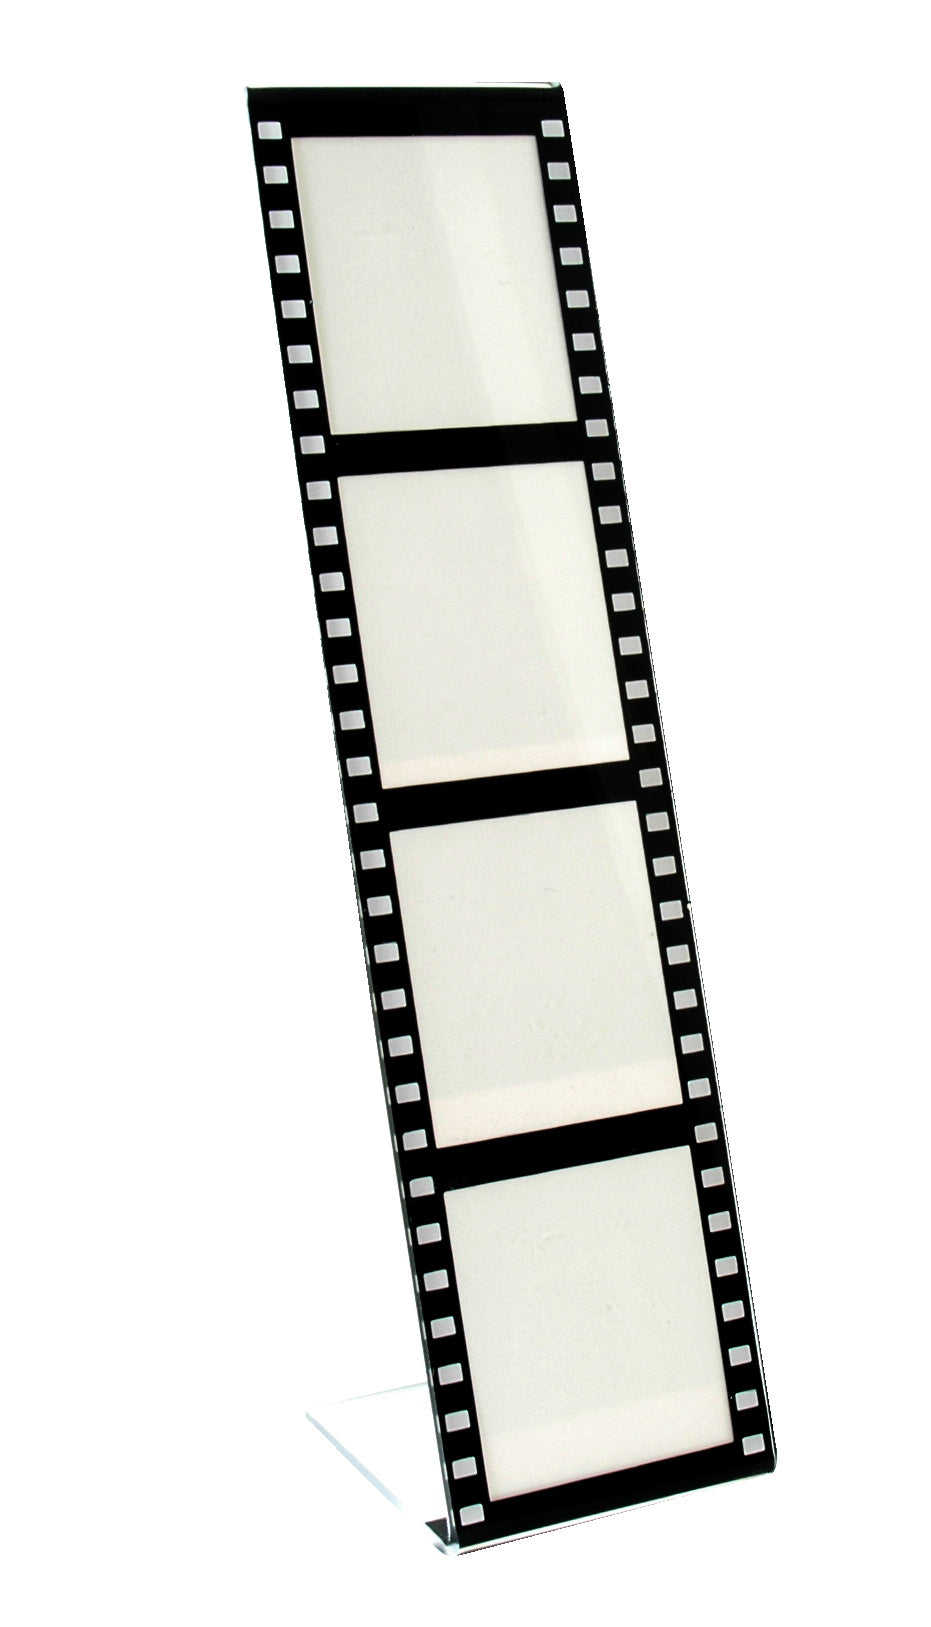 Photo Film Strip Easel Picture Frame